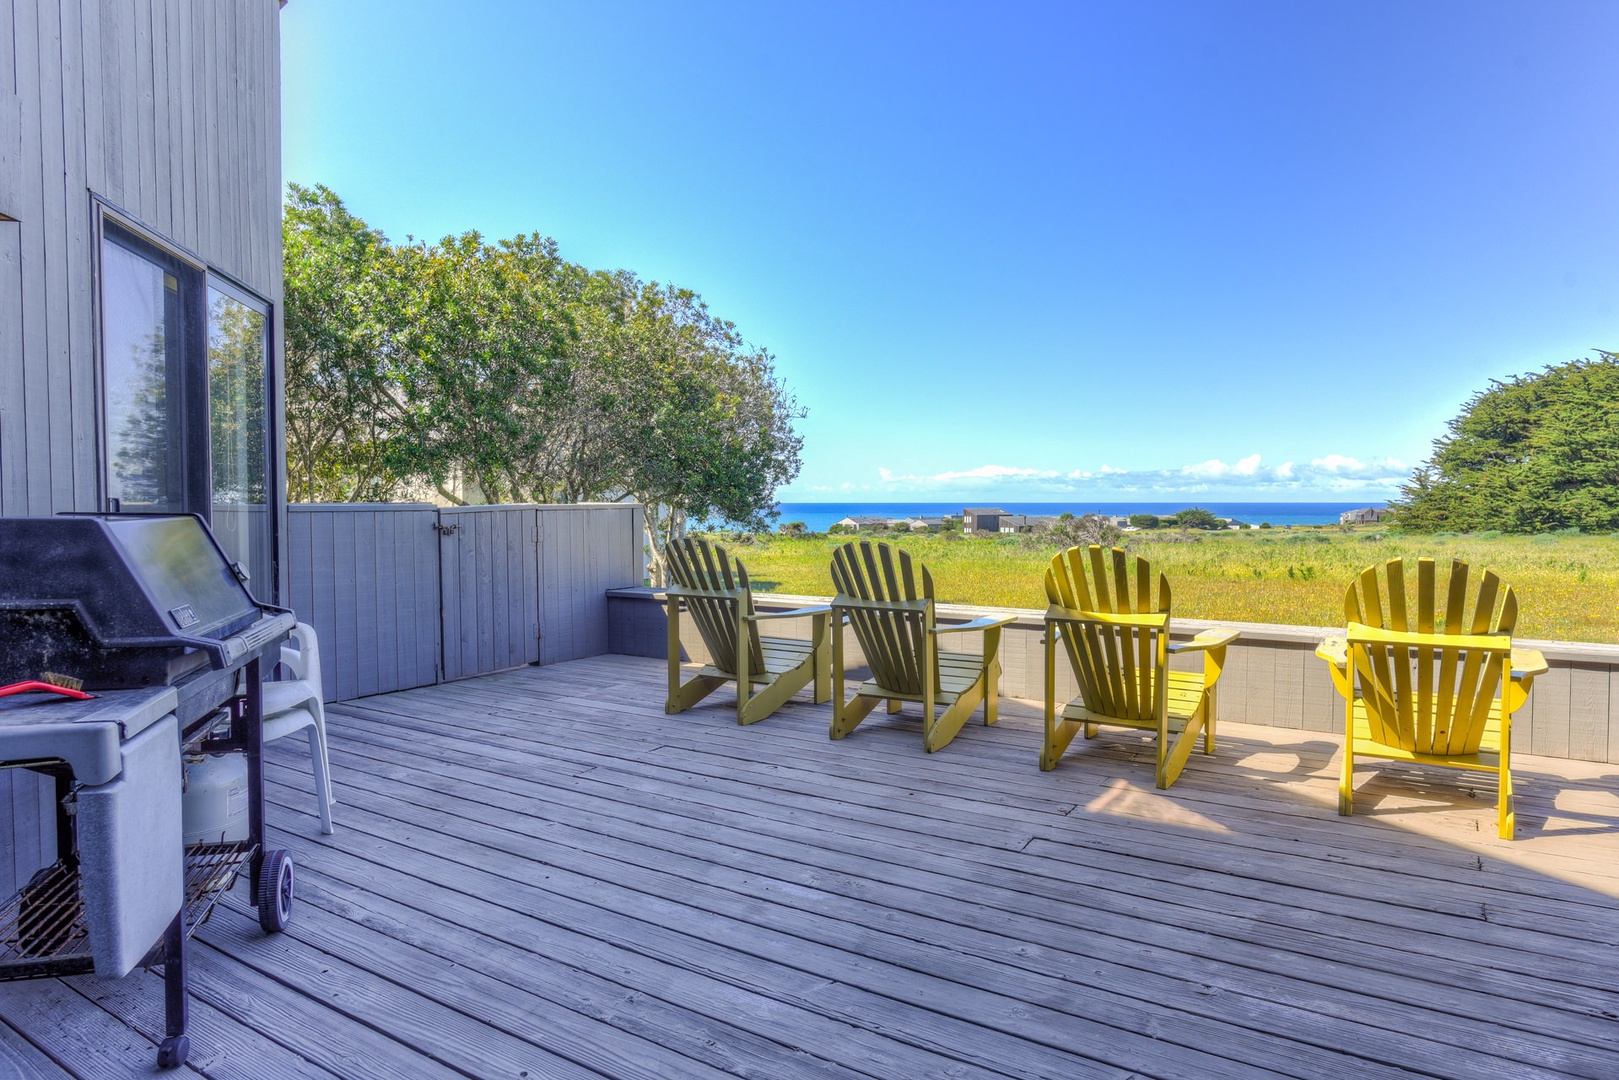 Large back deck with partial ocean view and outdoor seating